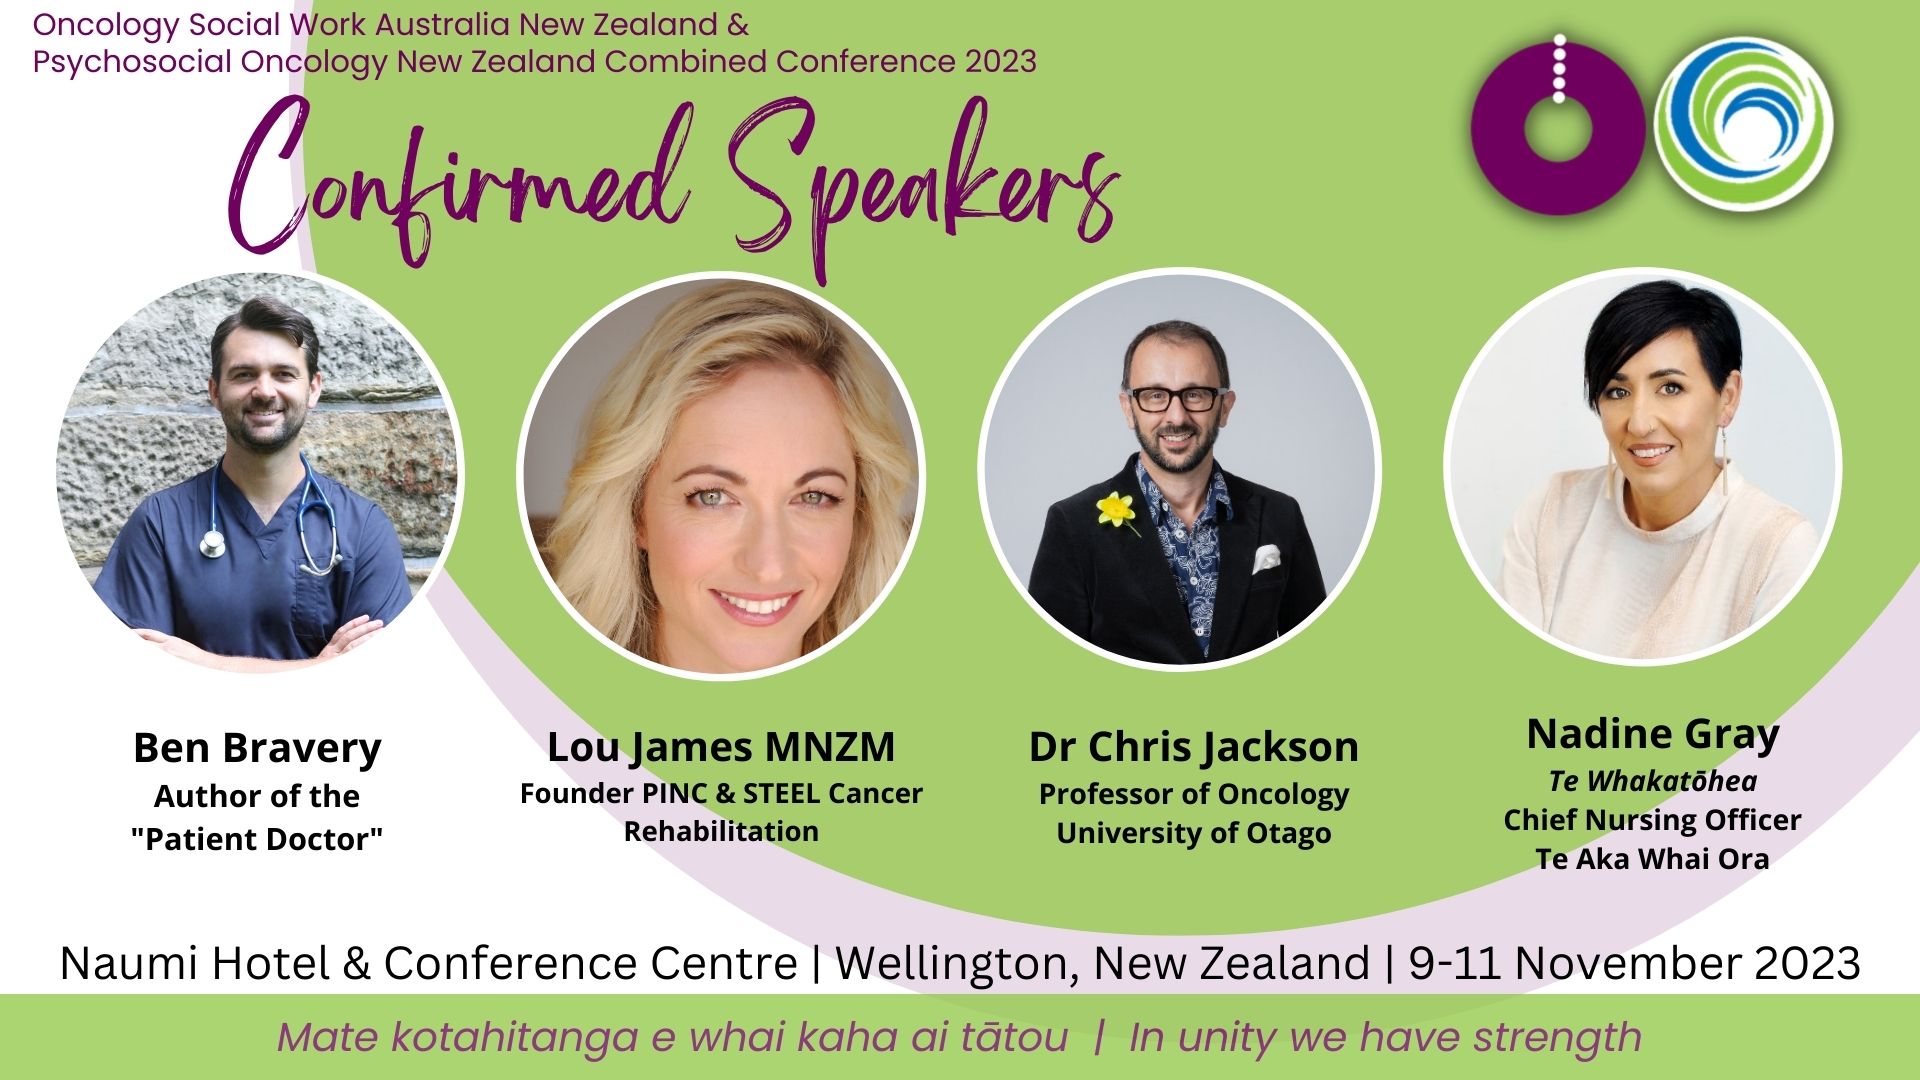 OSWANZ Conference 2023 - Confirmed Speakers 2